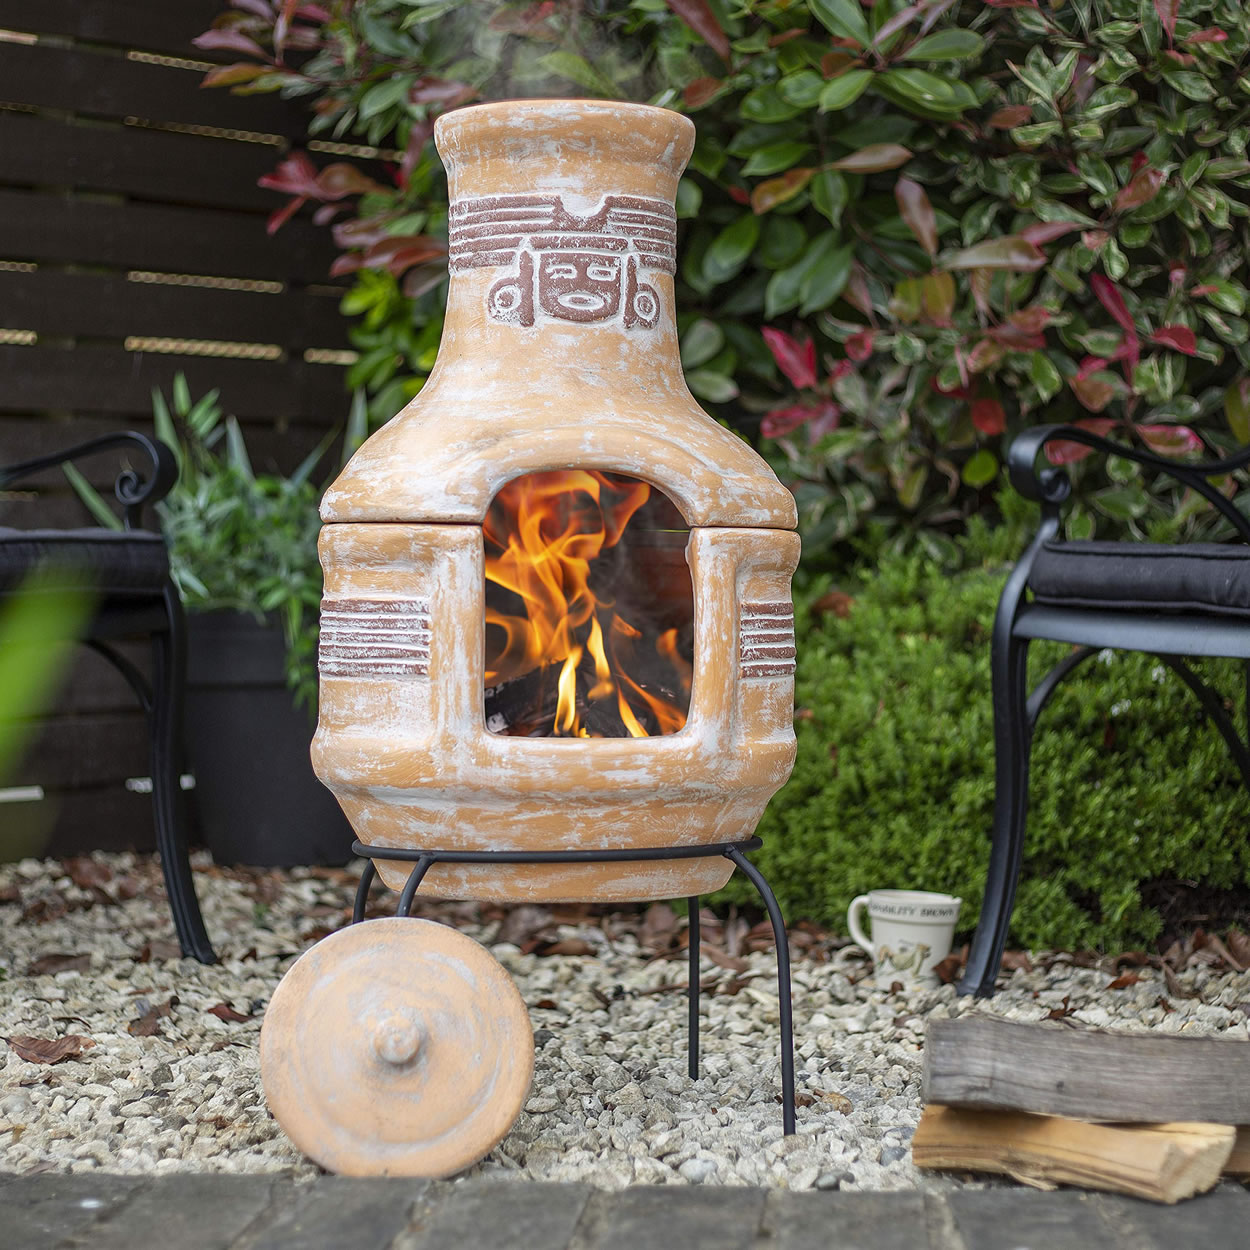 Oxford Barbecues Maisemore Clay Chiminea With BBQ Grill